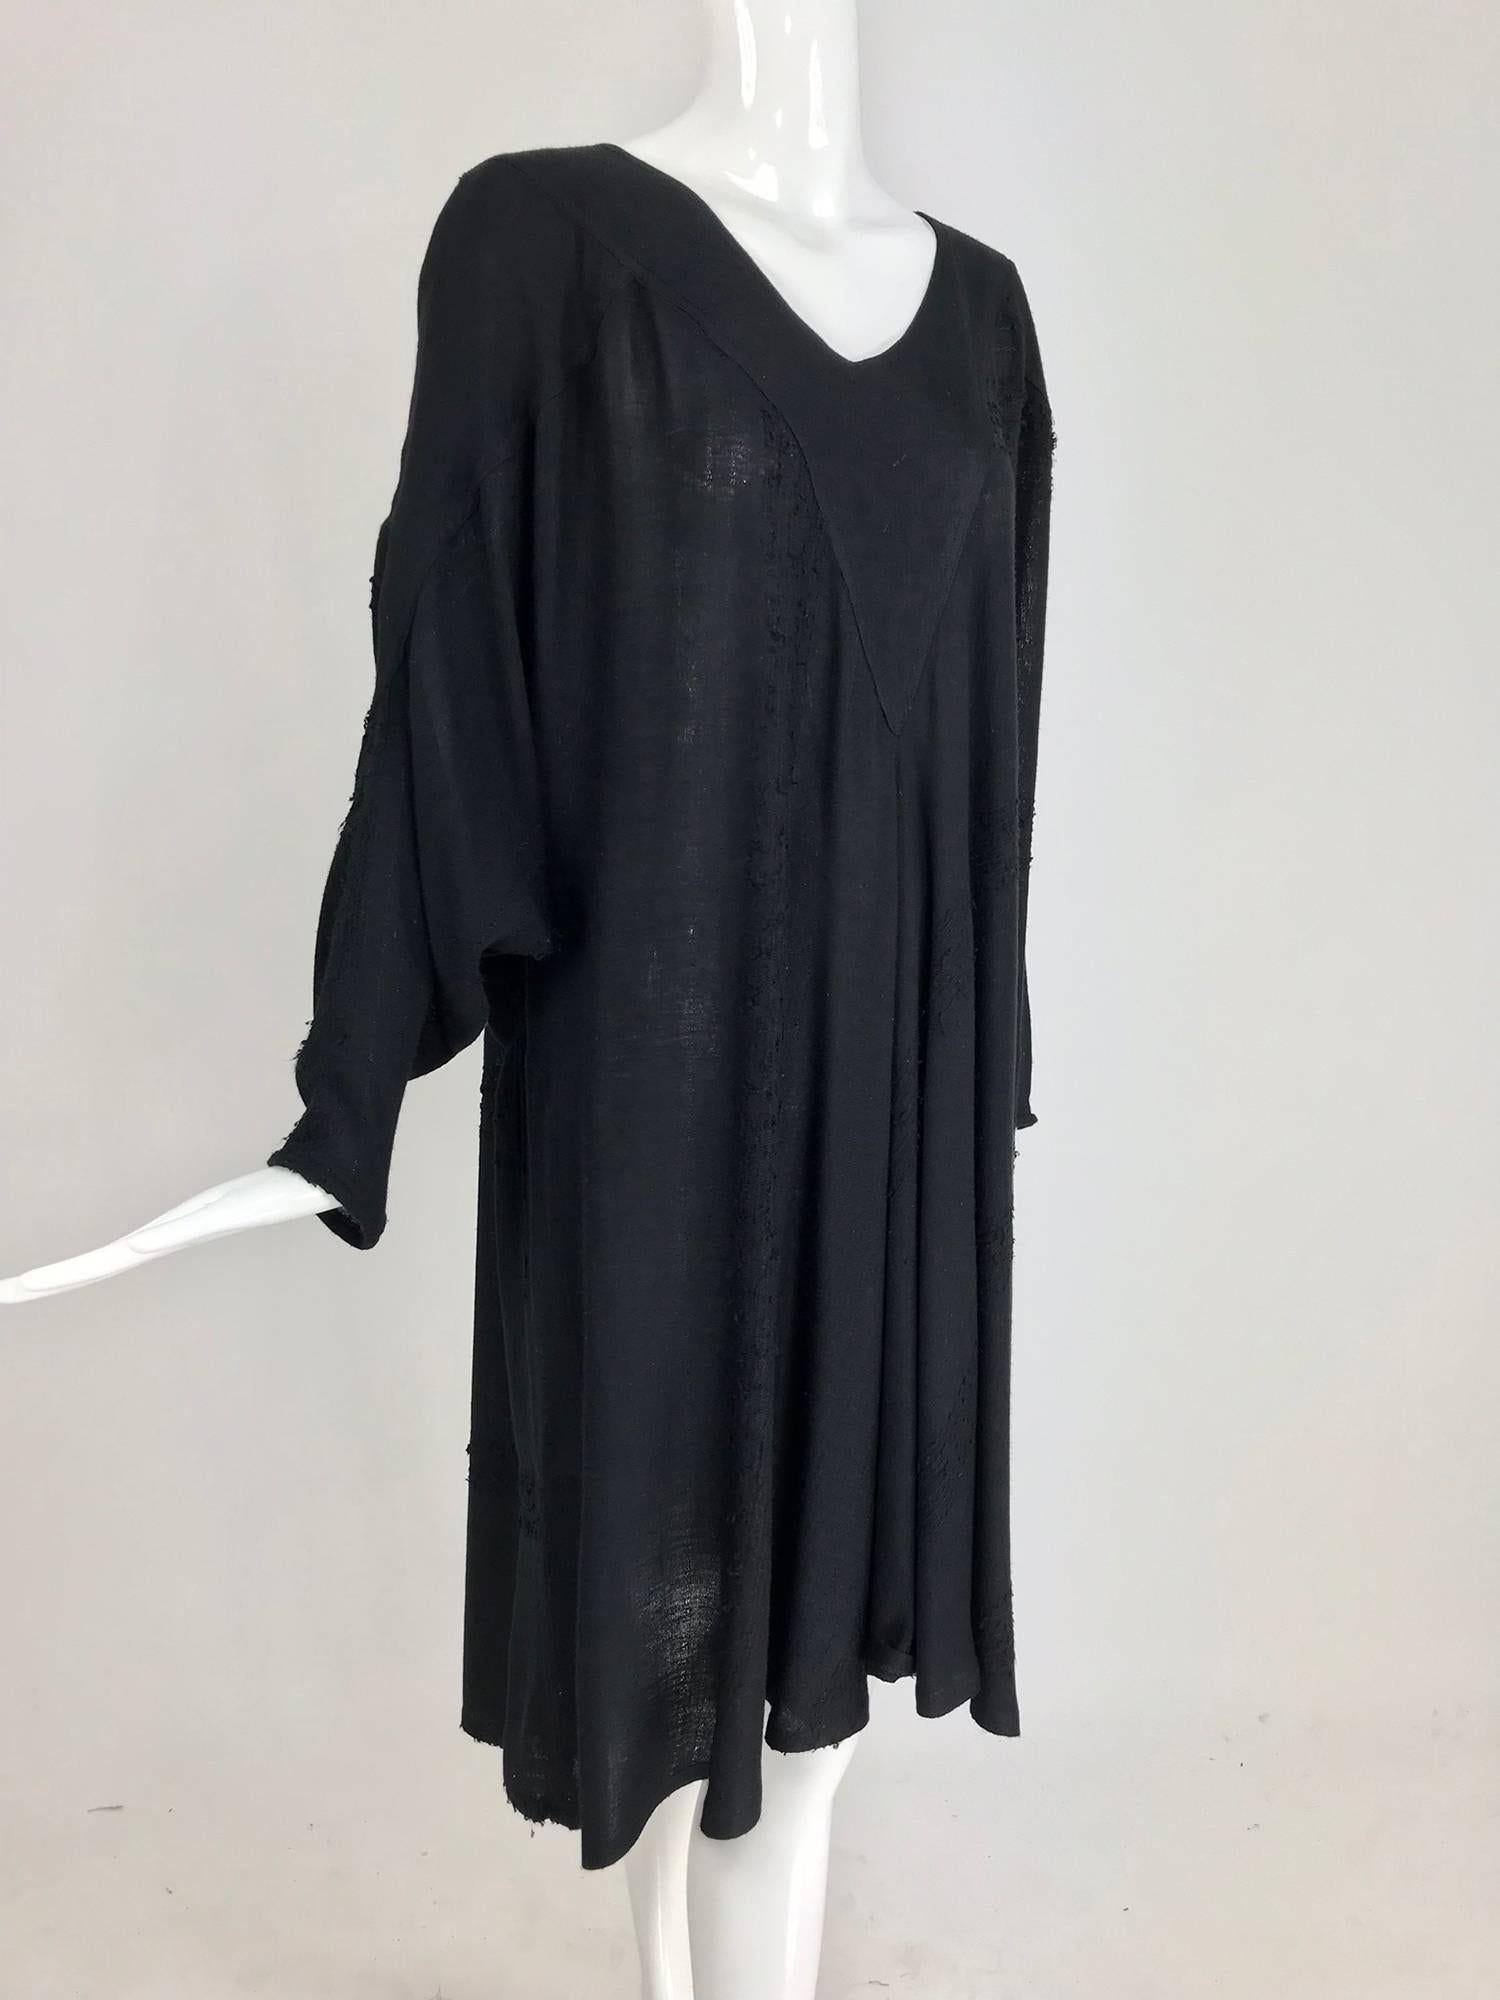 Laise Adzer black Susti gauze bat wing tunic caftan from the 1980s. Laise Adzer was known for bohemian style in the 1980s. The fabrics, called Susti, were made in Morocco, a blend of Egyptian cotton and organic rayon woven in with a distinctive